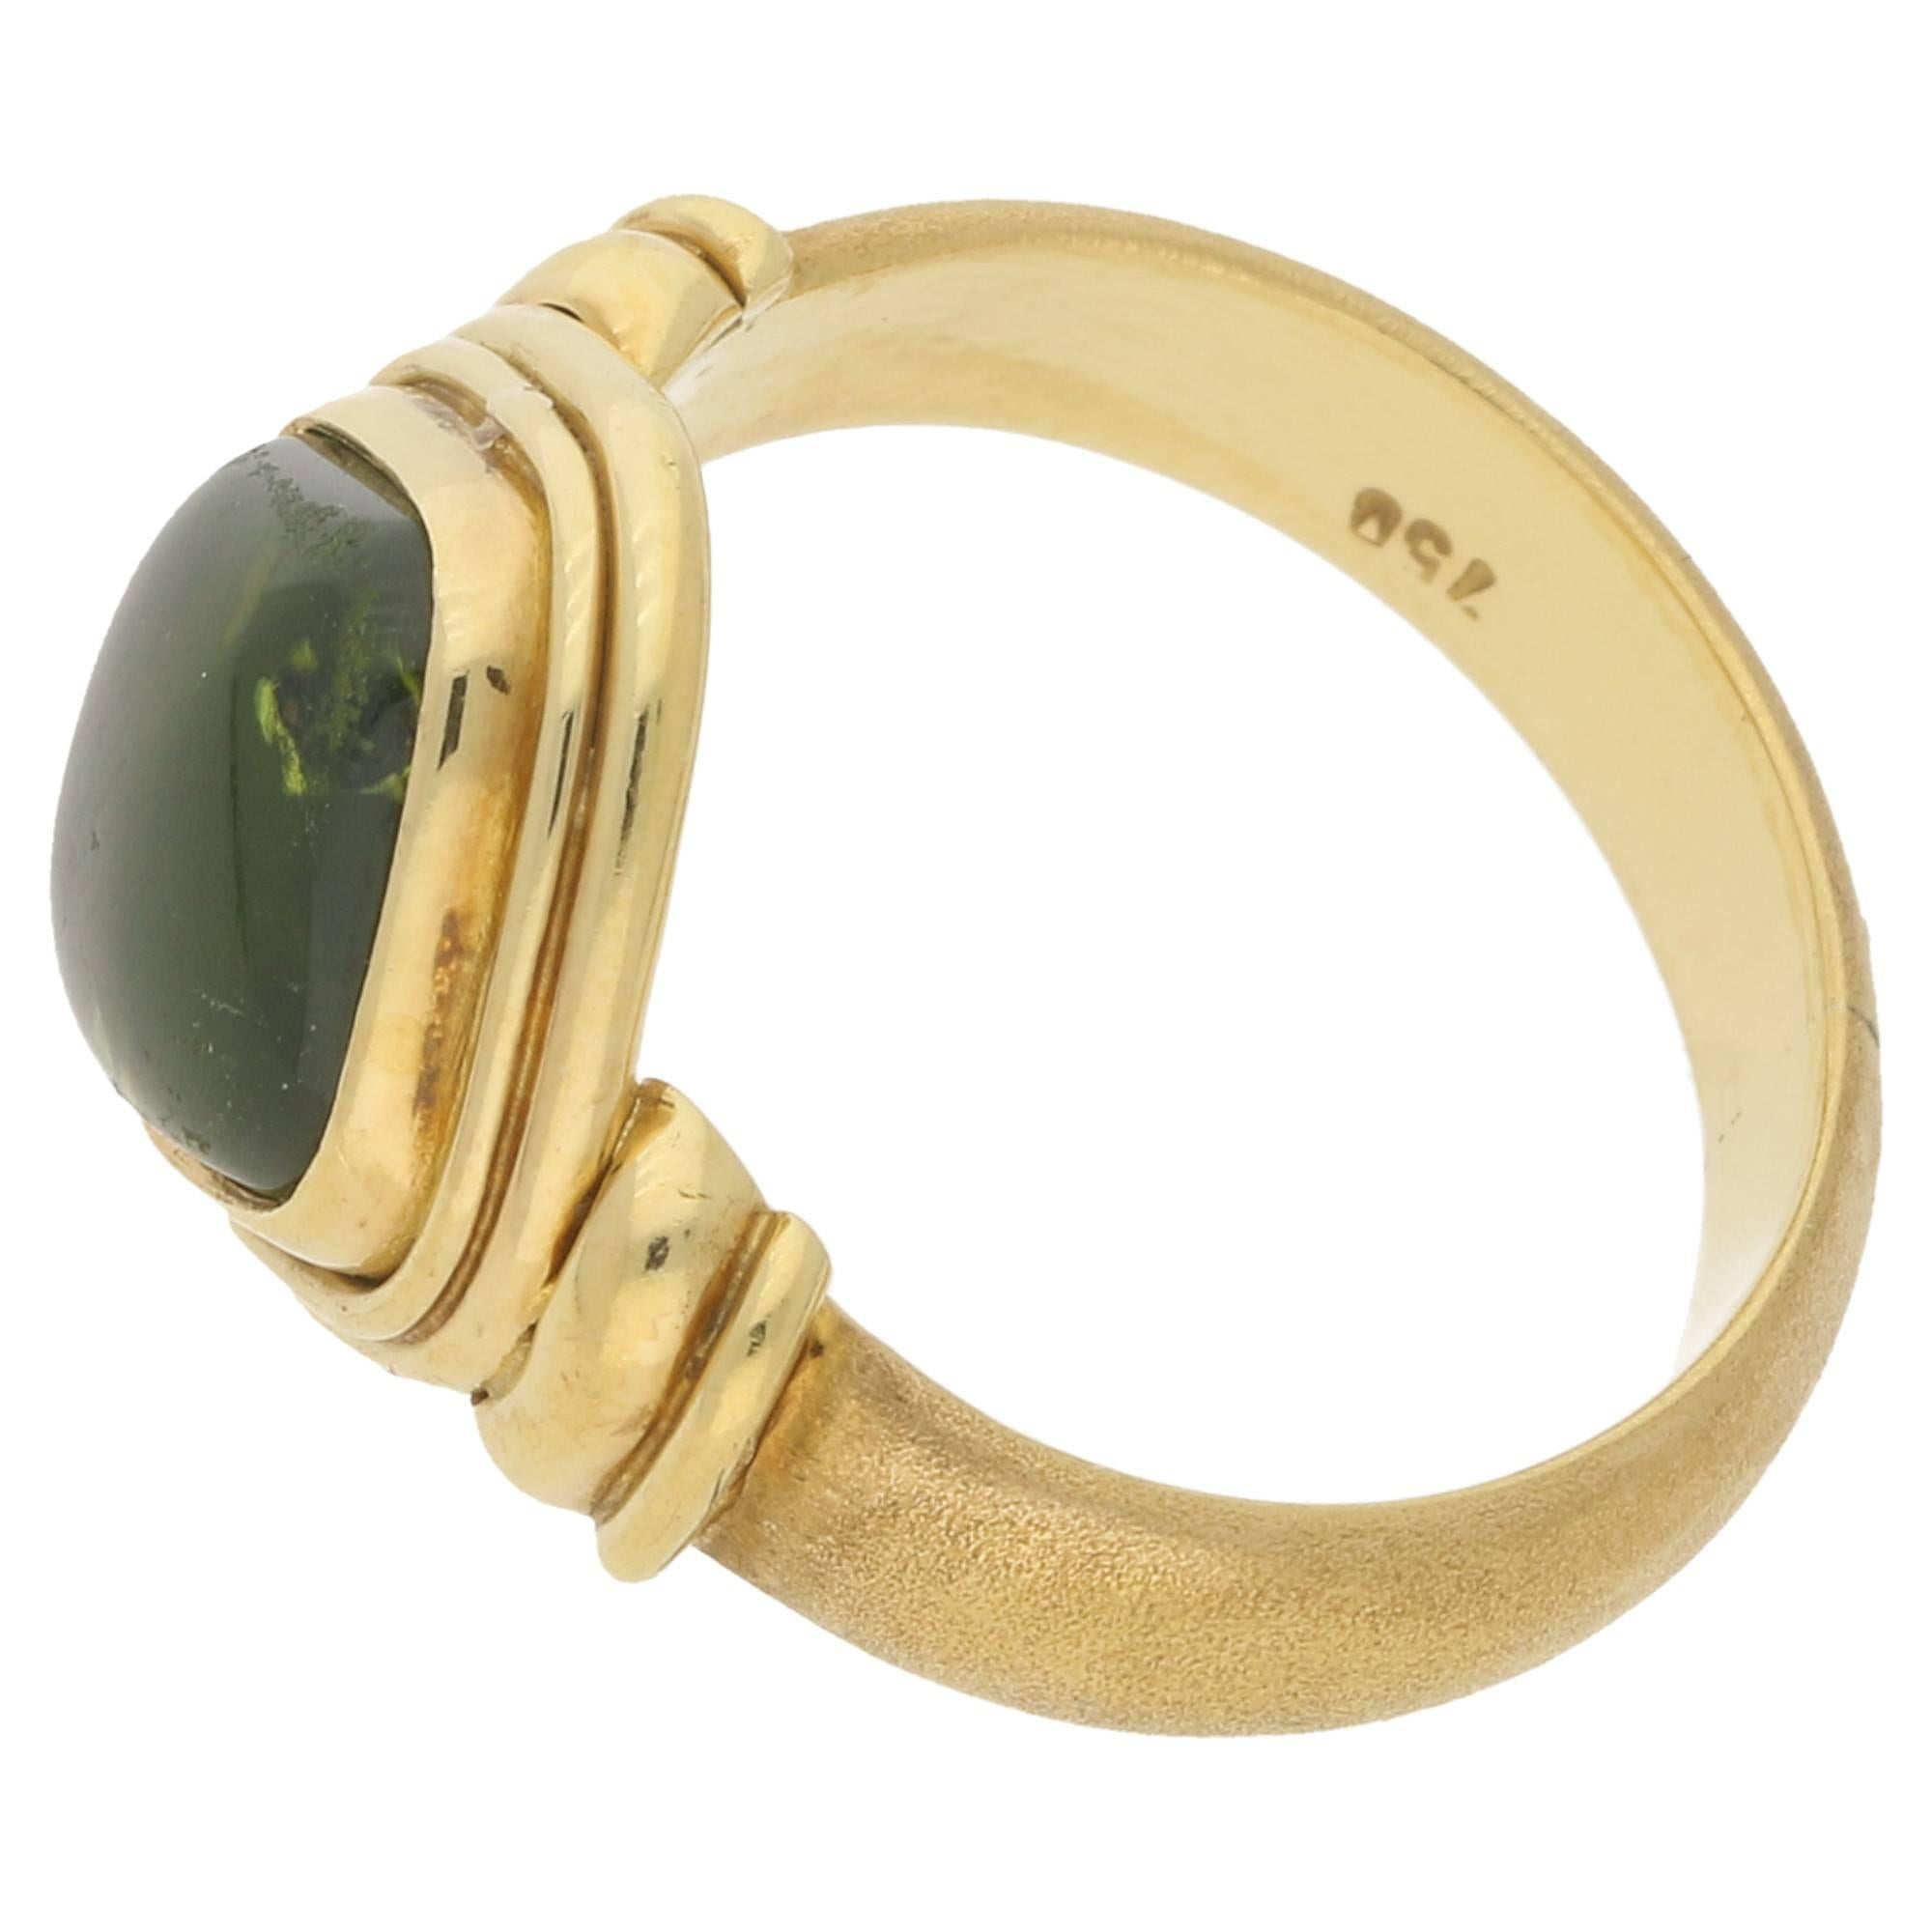 A Georgian inspired dress ring consisting of a square shaped cabochon peridot, rub-over set to the centre in a beautifully contrasting 18k yellow gold mount which is stamped 750.  

This beautiful green coloured peridot is one of those rare